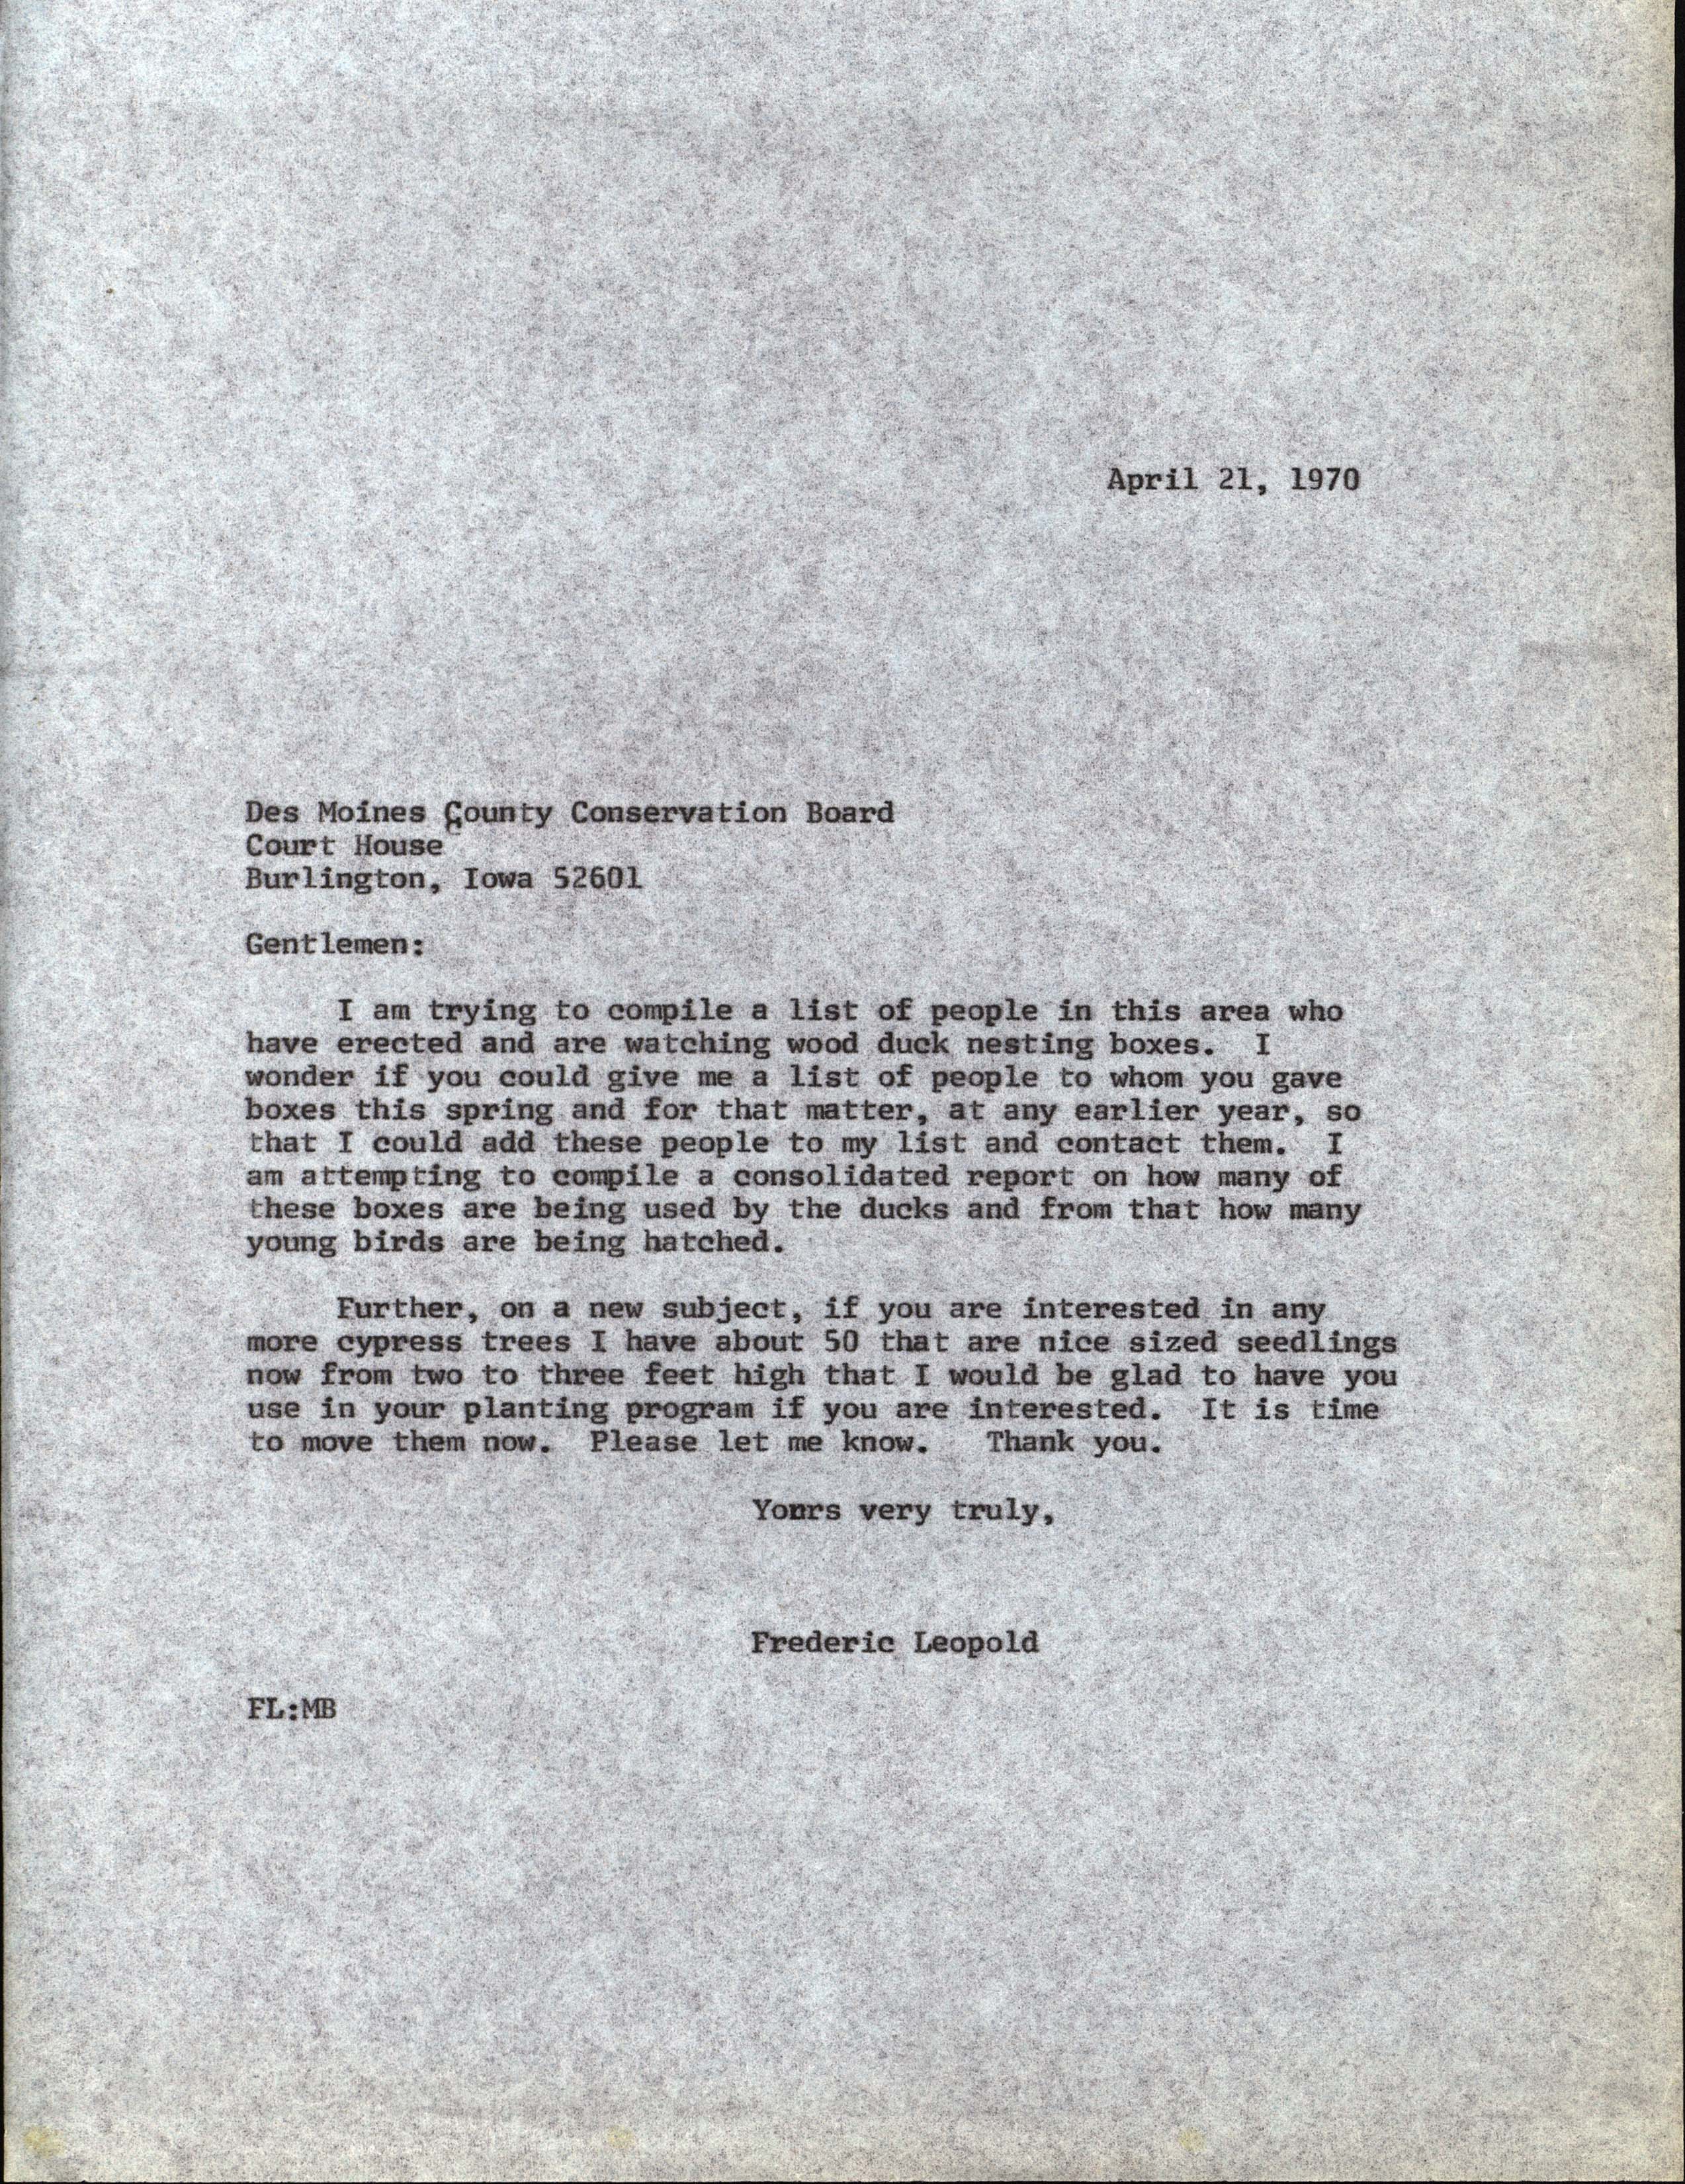 Frederic Leopold letter to the Des Moines County Conservation Board regarding Wood Duck houses, April 21, 1970